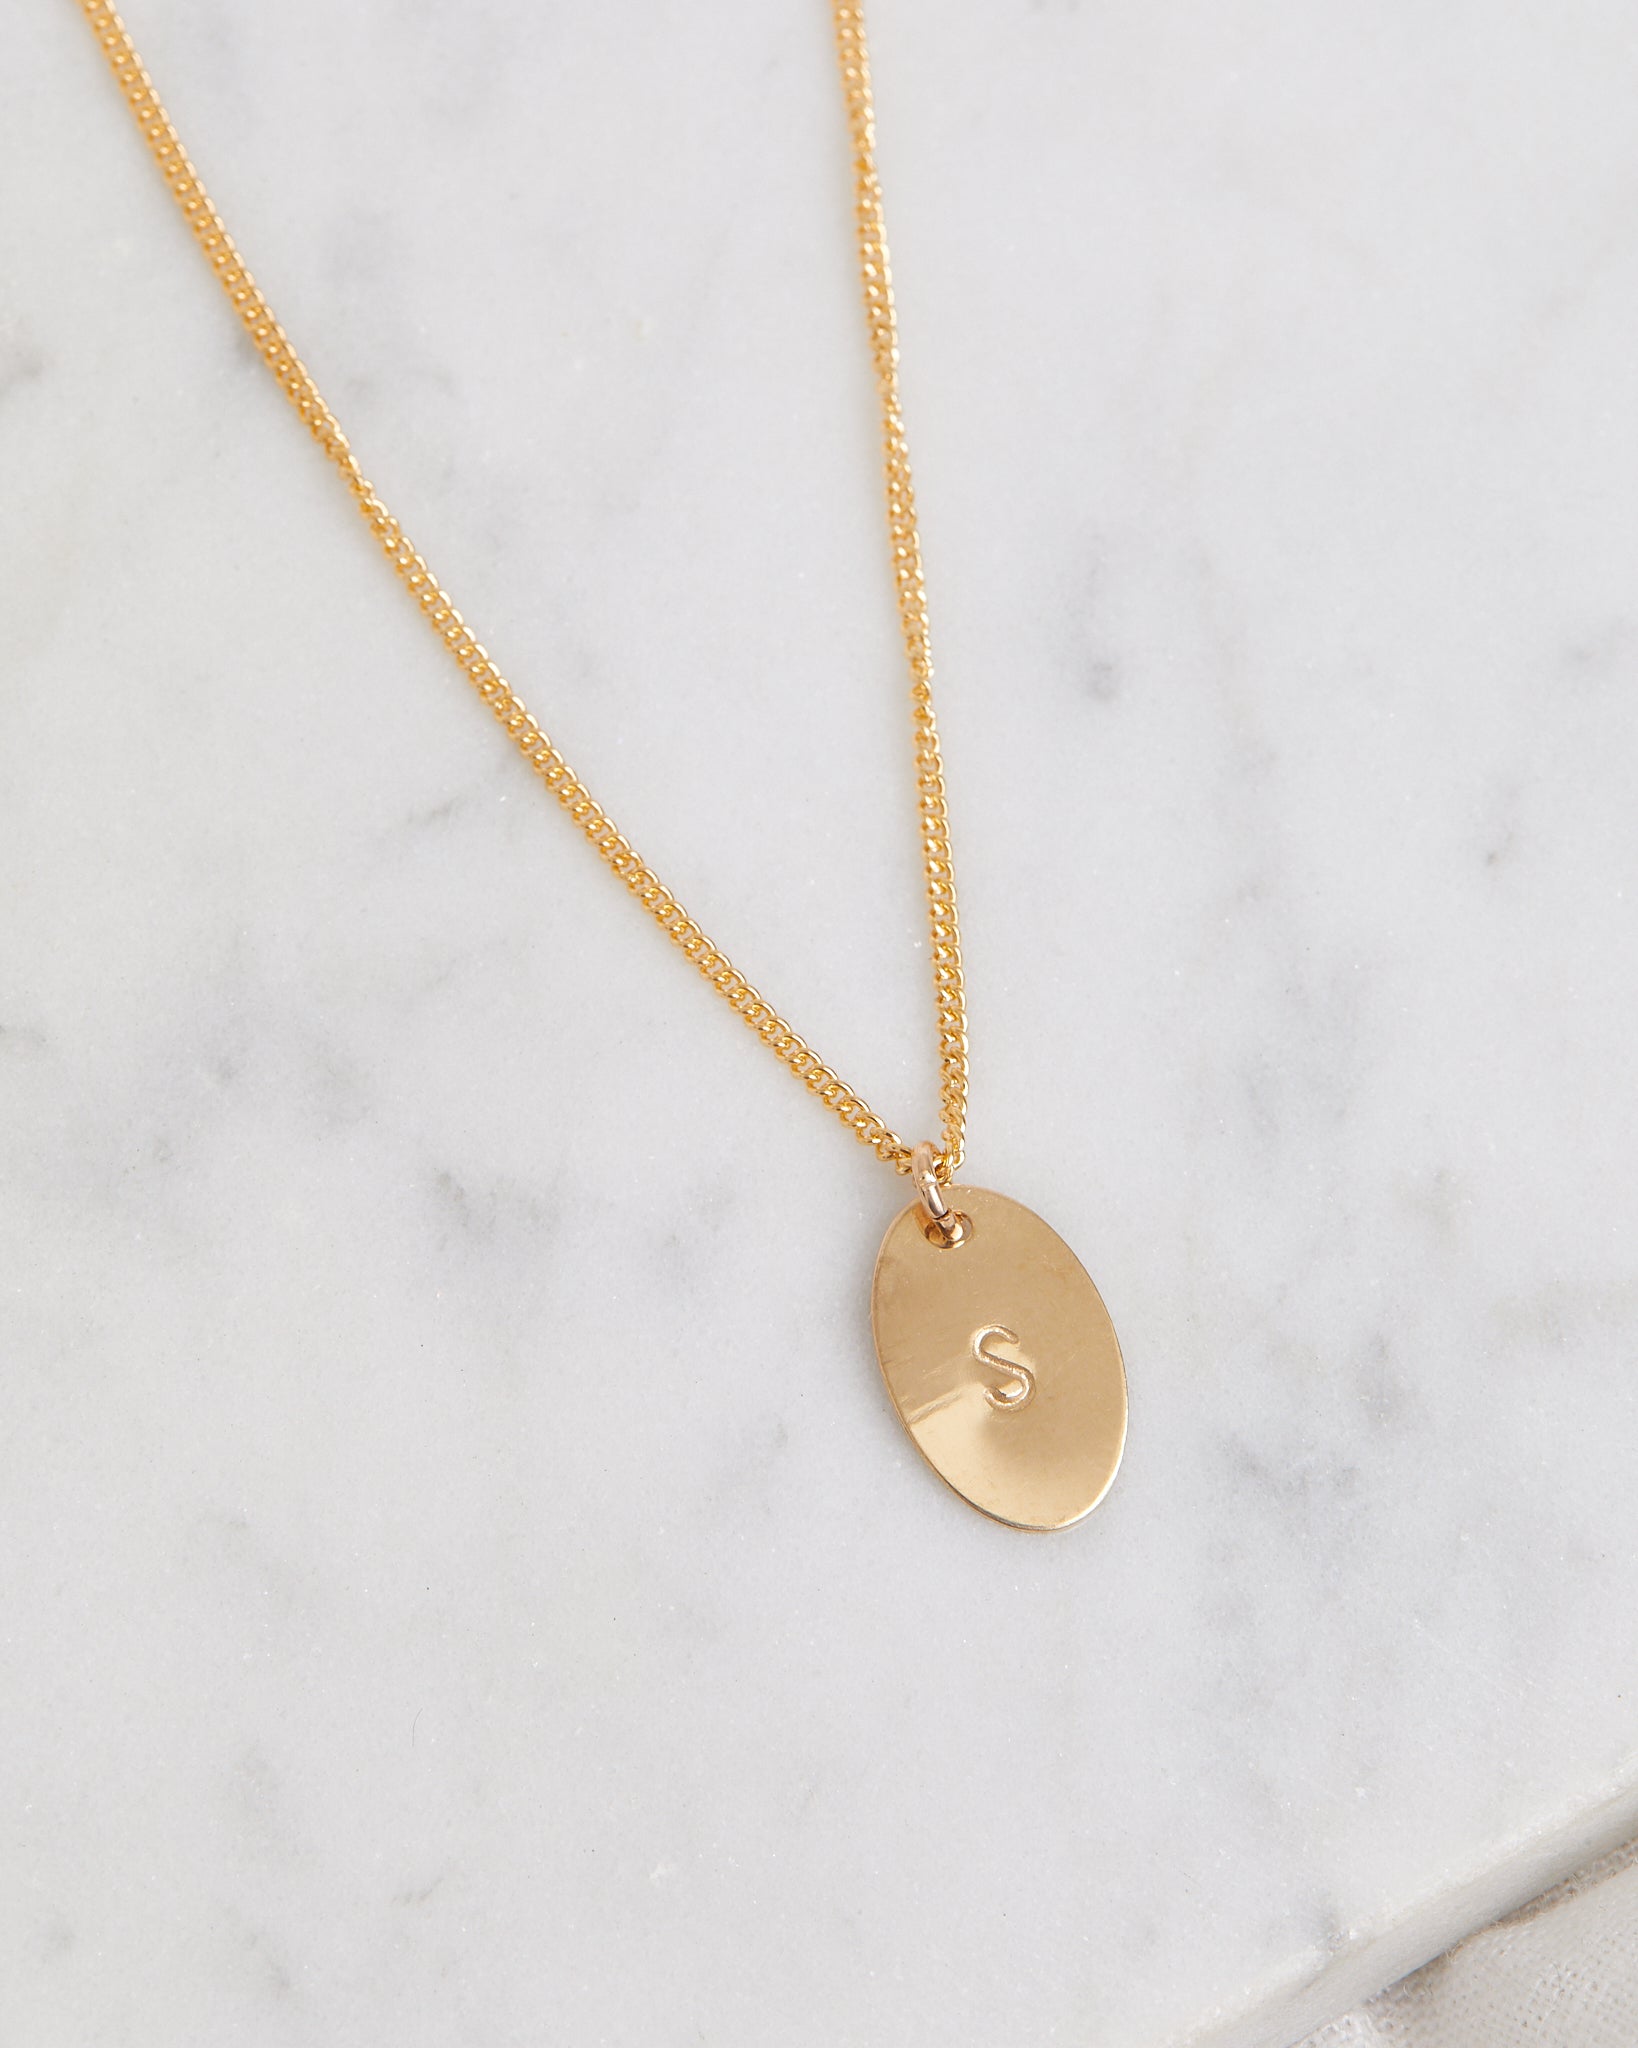 Personalized Gold Heart Necklace, Tiffany Style Heart Necklace, Hand Stamped  Initial Necklace, Gold Family Necklace, Mother's